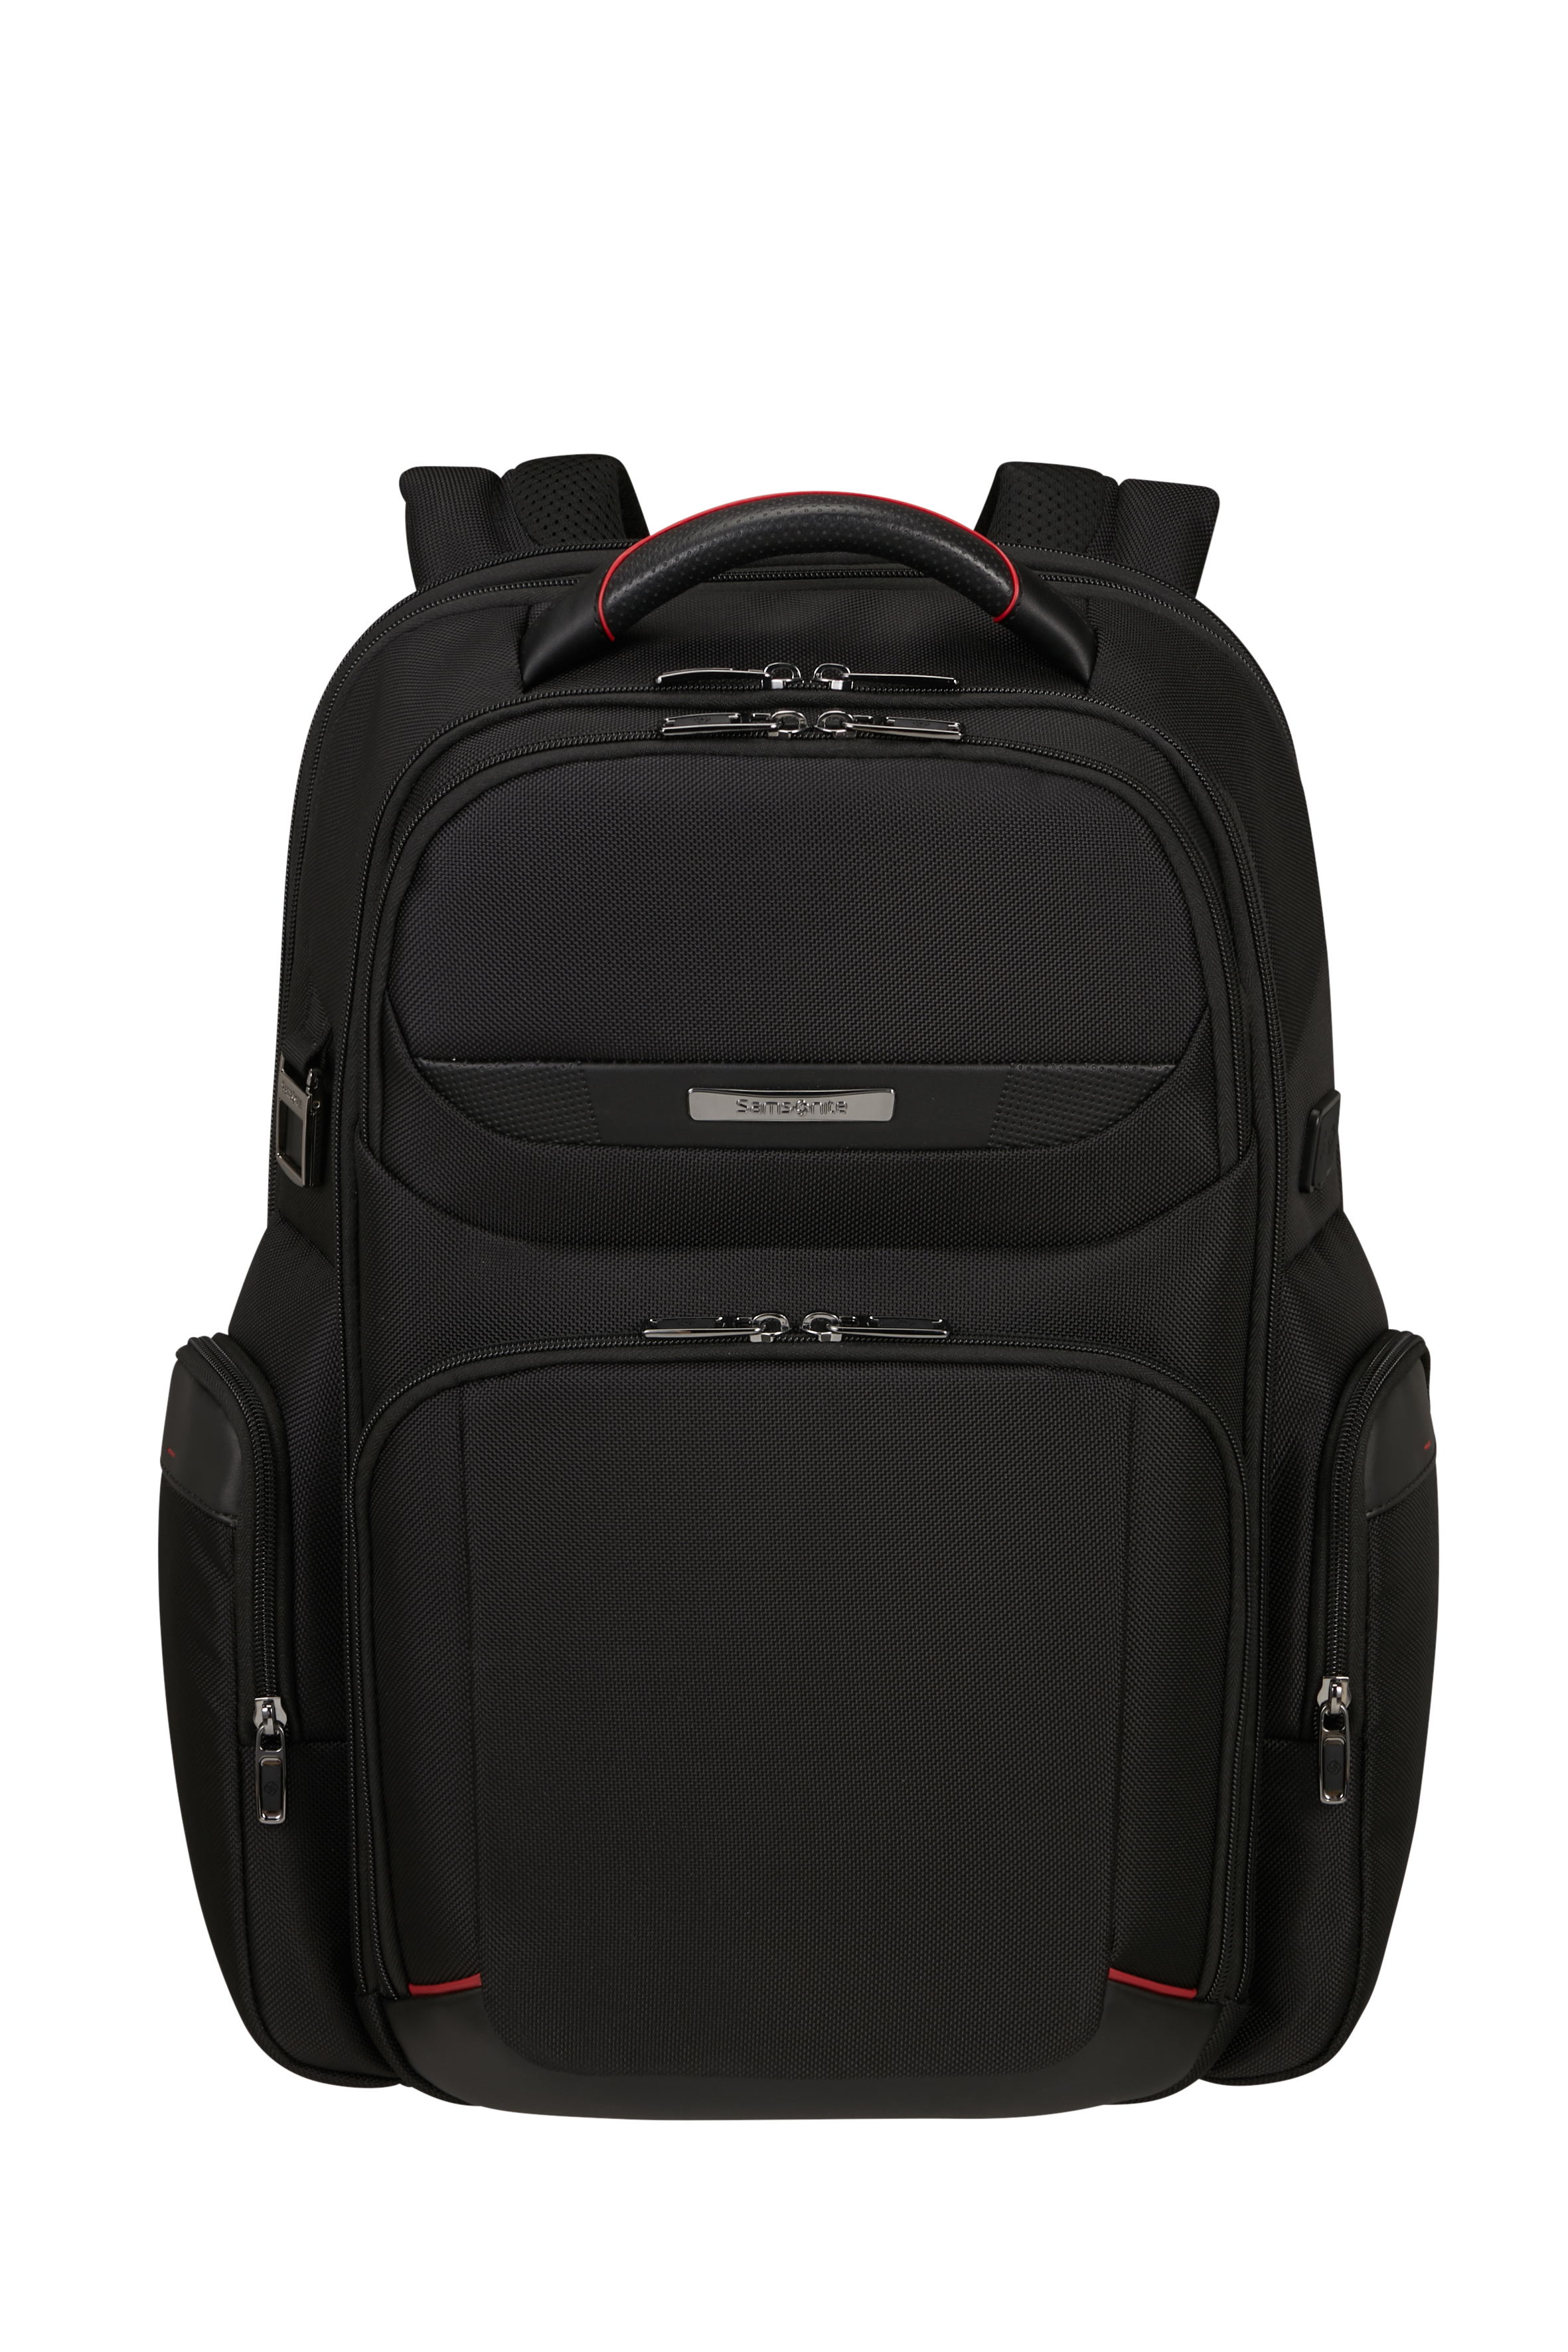 PRO-DLX 6 BACKPACK 17.3